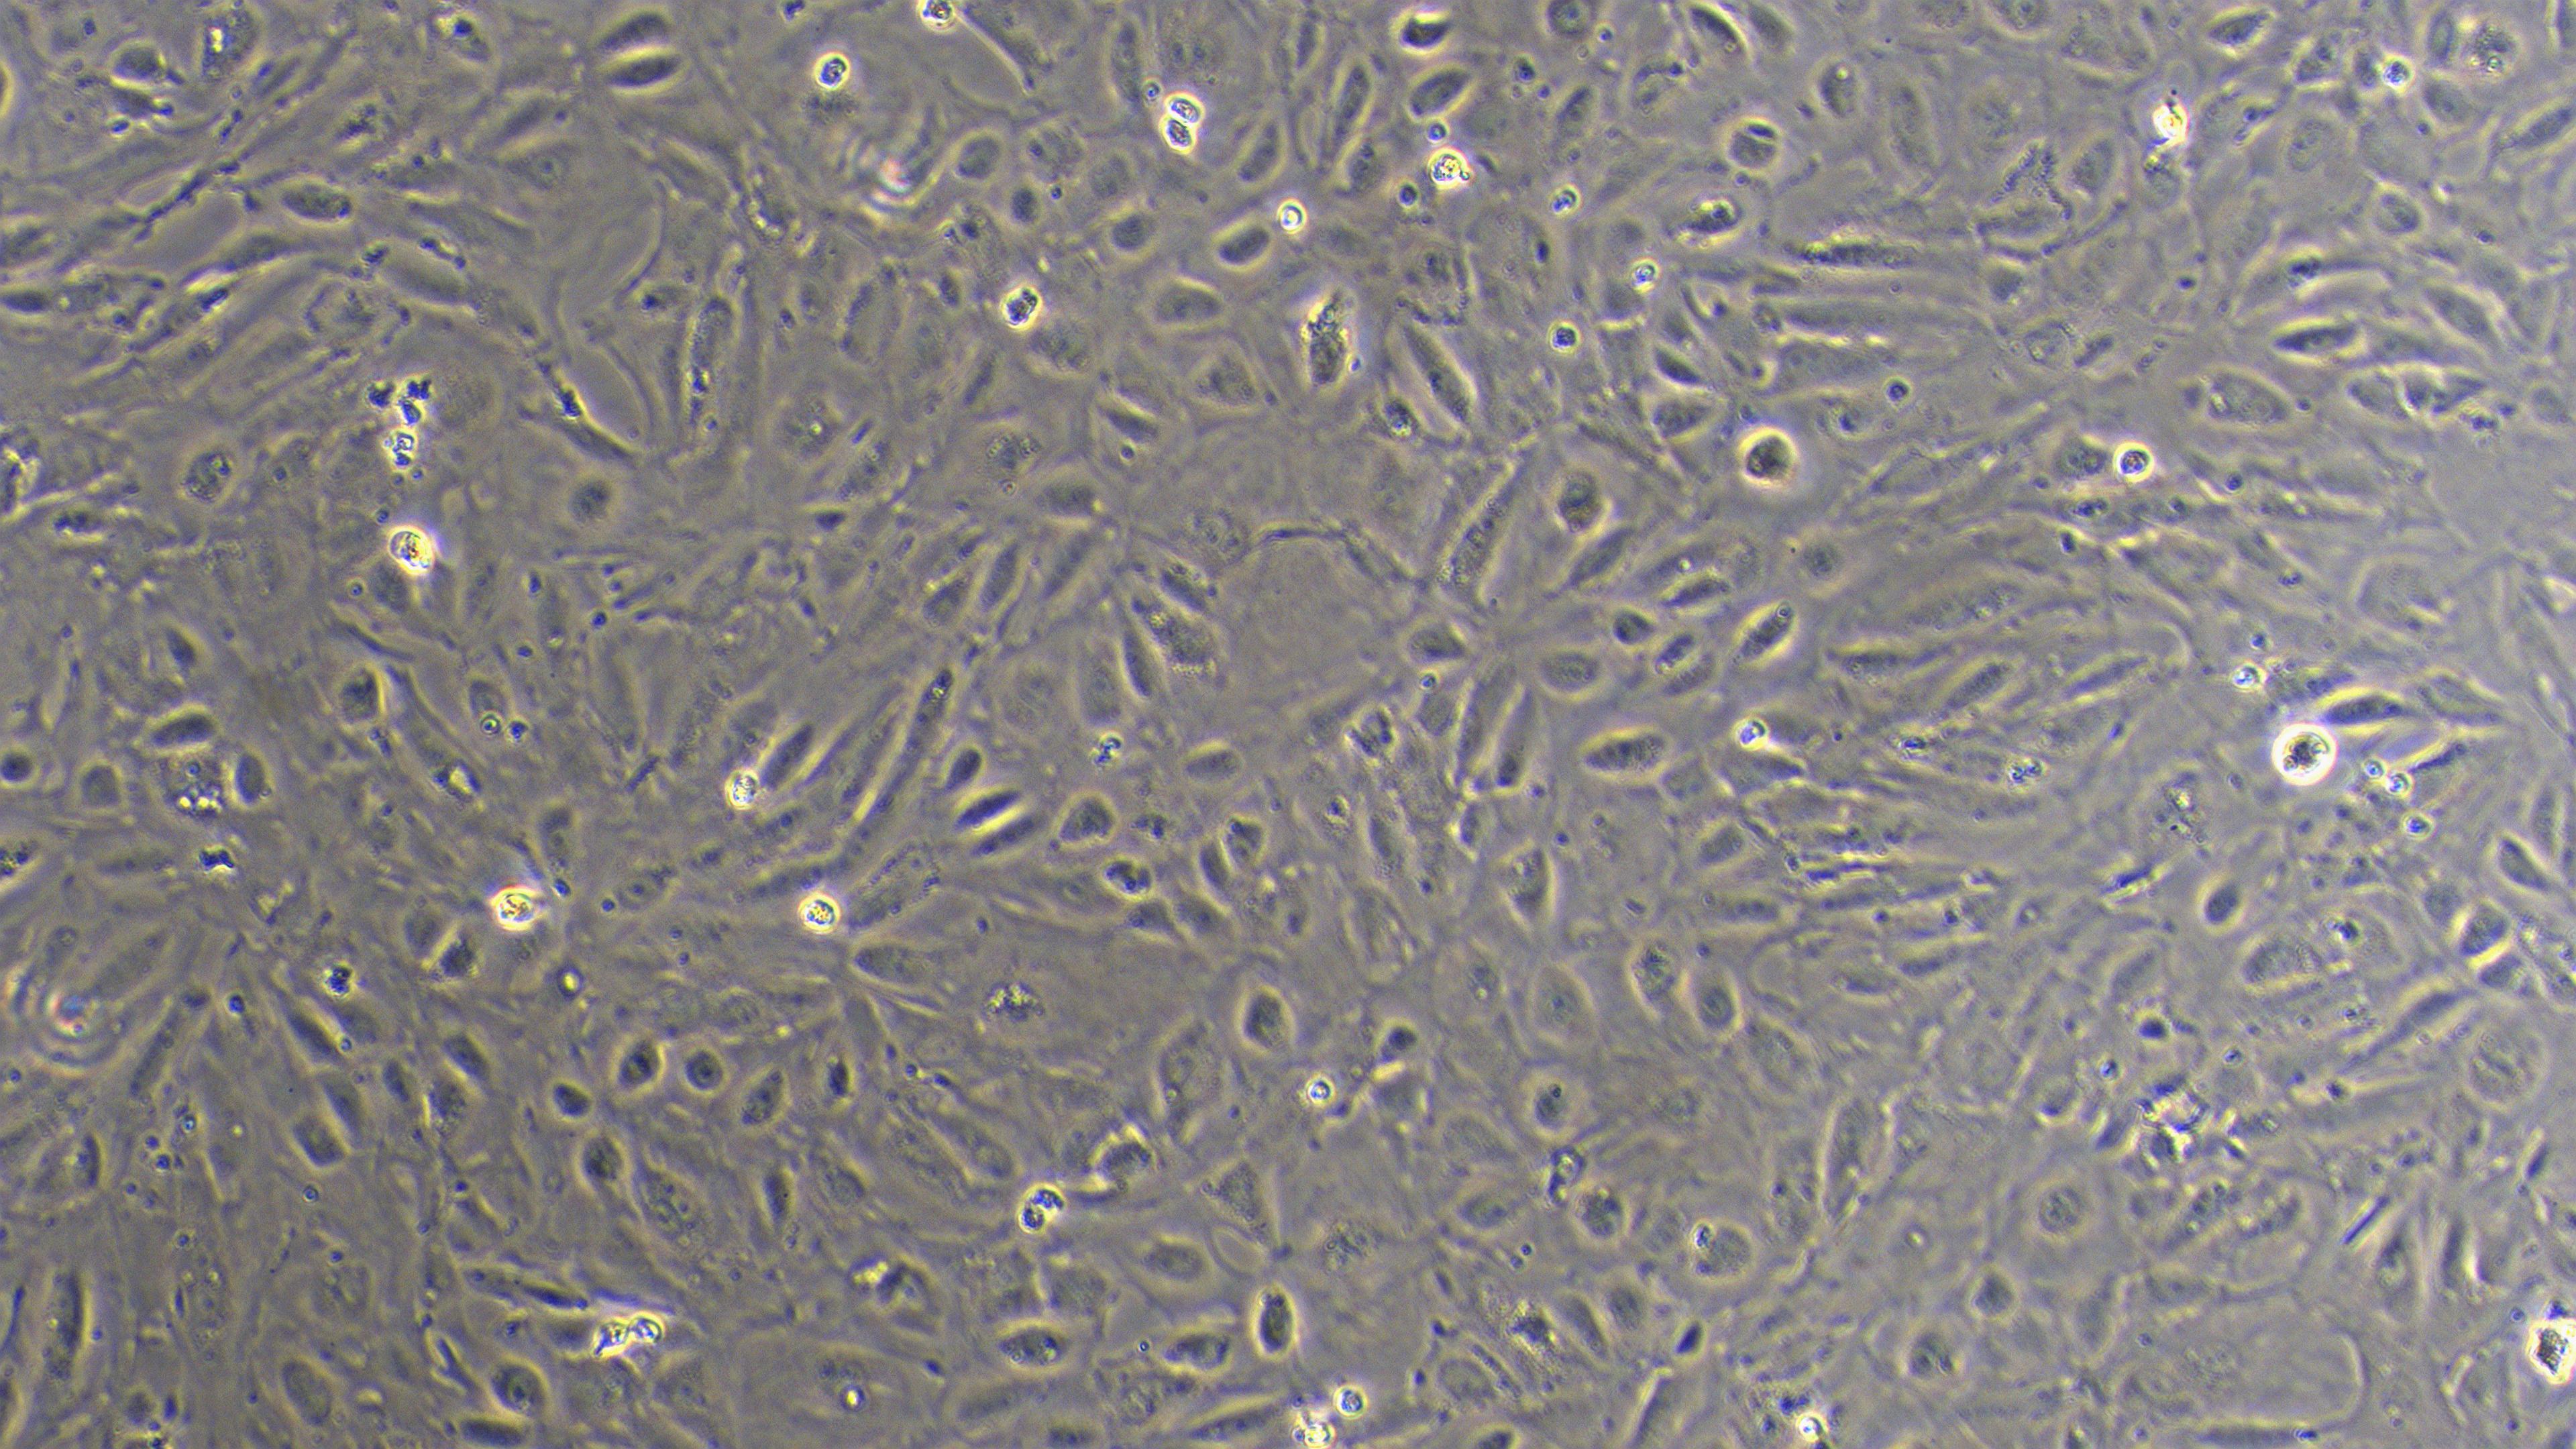 Primary Mouse Umbilical Vein Endothelial Cells (UVEC)